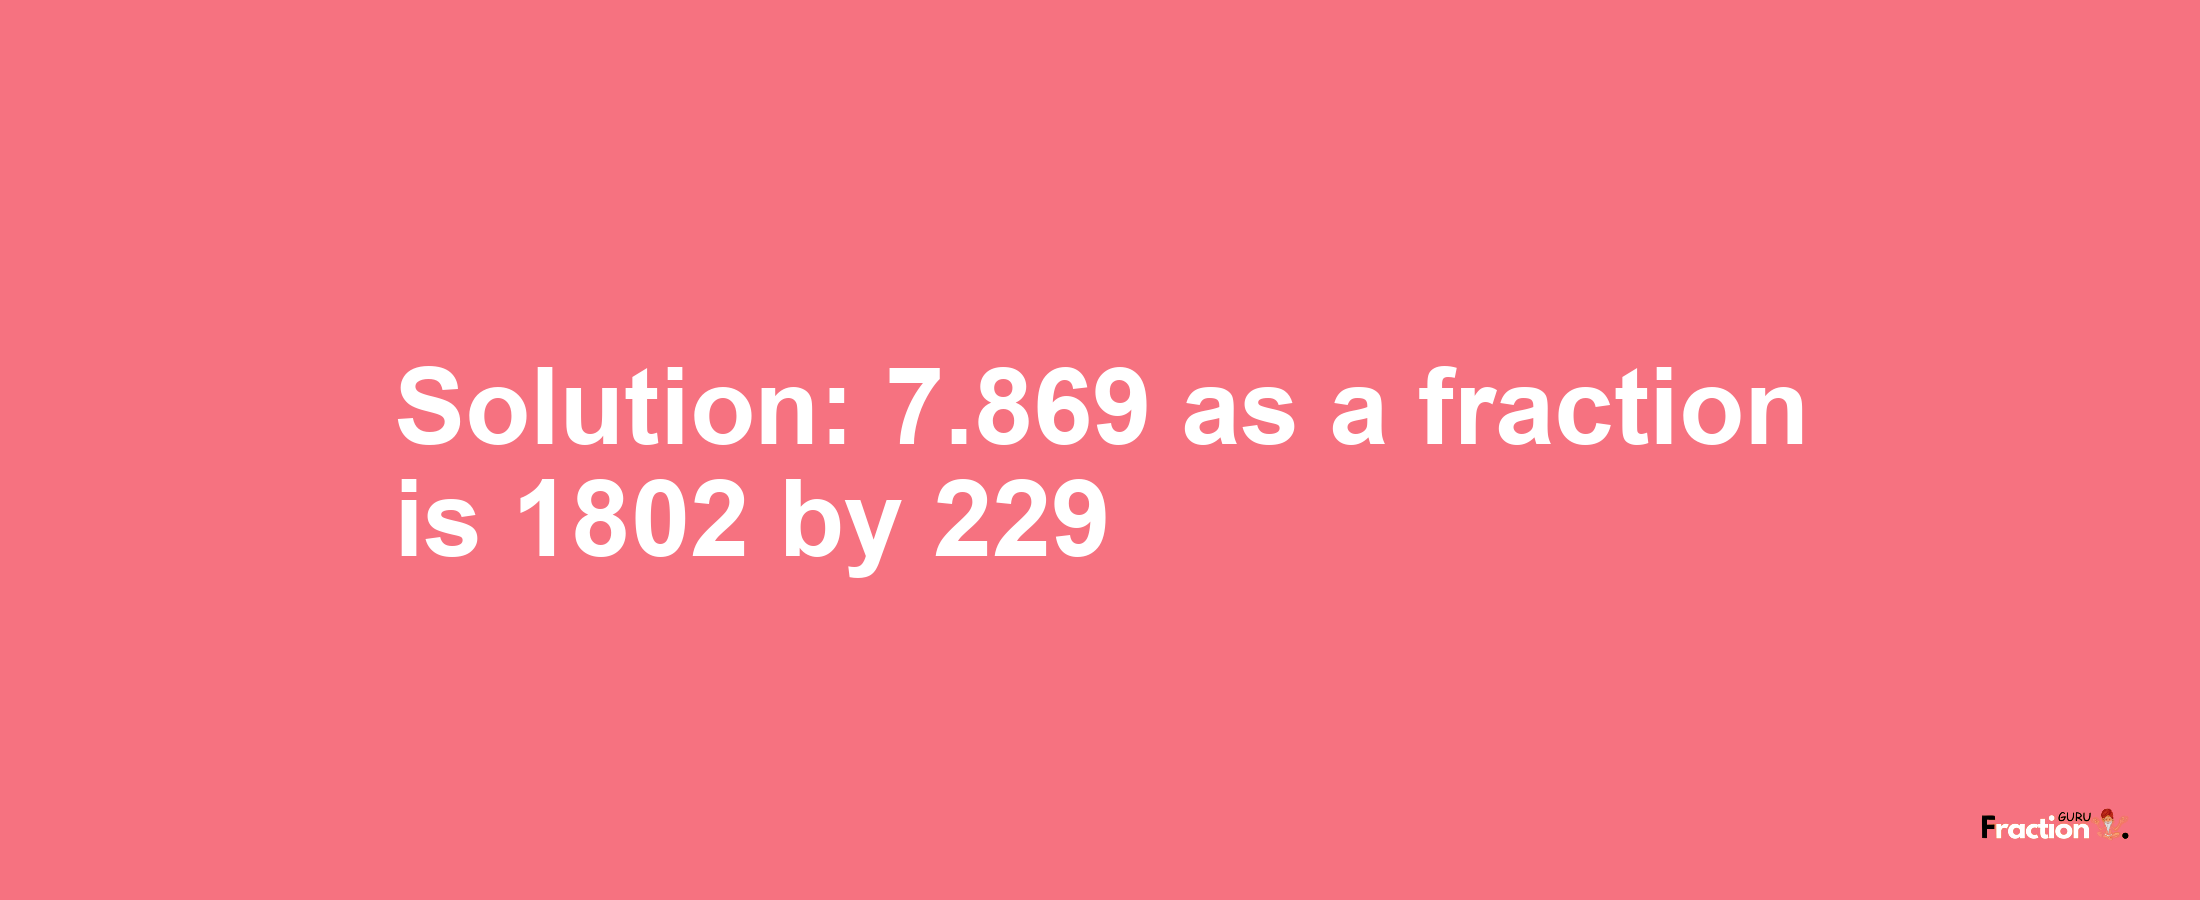 Solution:7.869 as a fraction is 1802/229